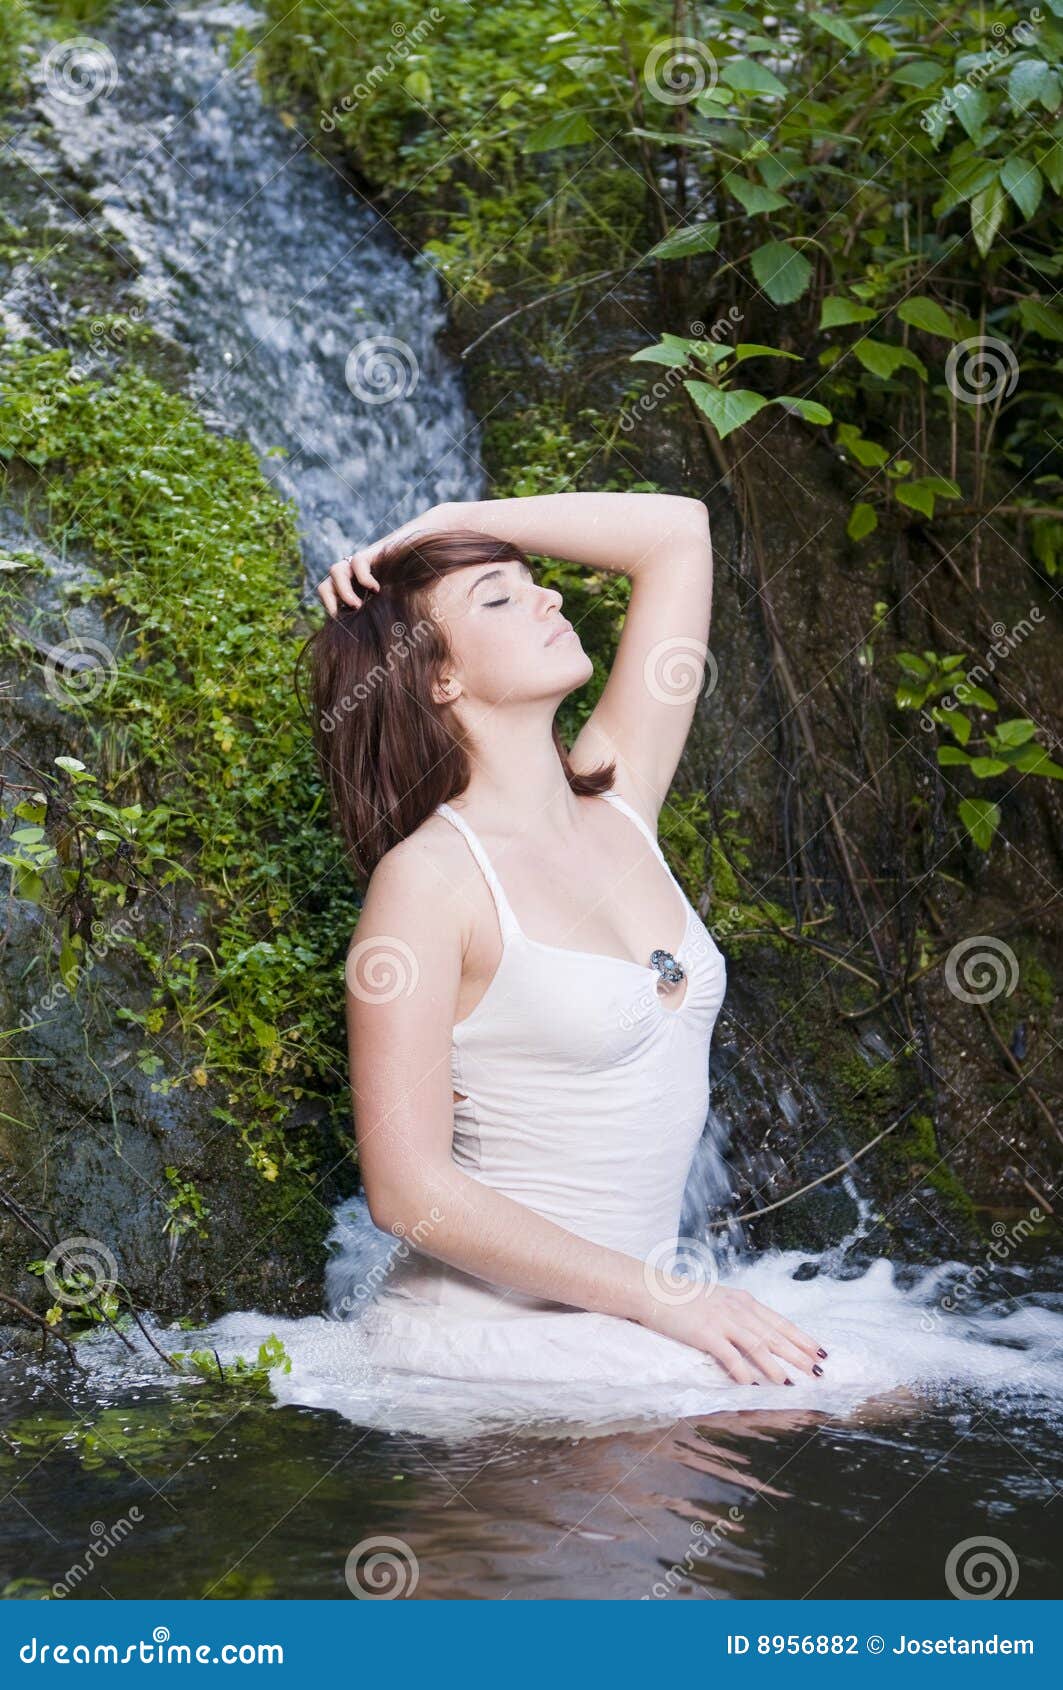 Woman Having A Bath In A Waterfall Stock Photography - Image: 8956882